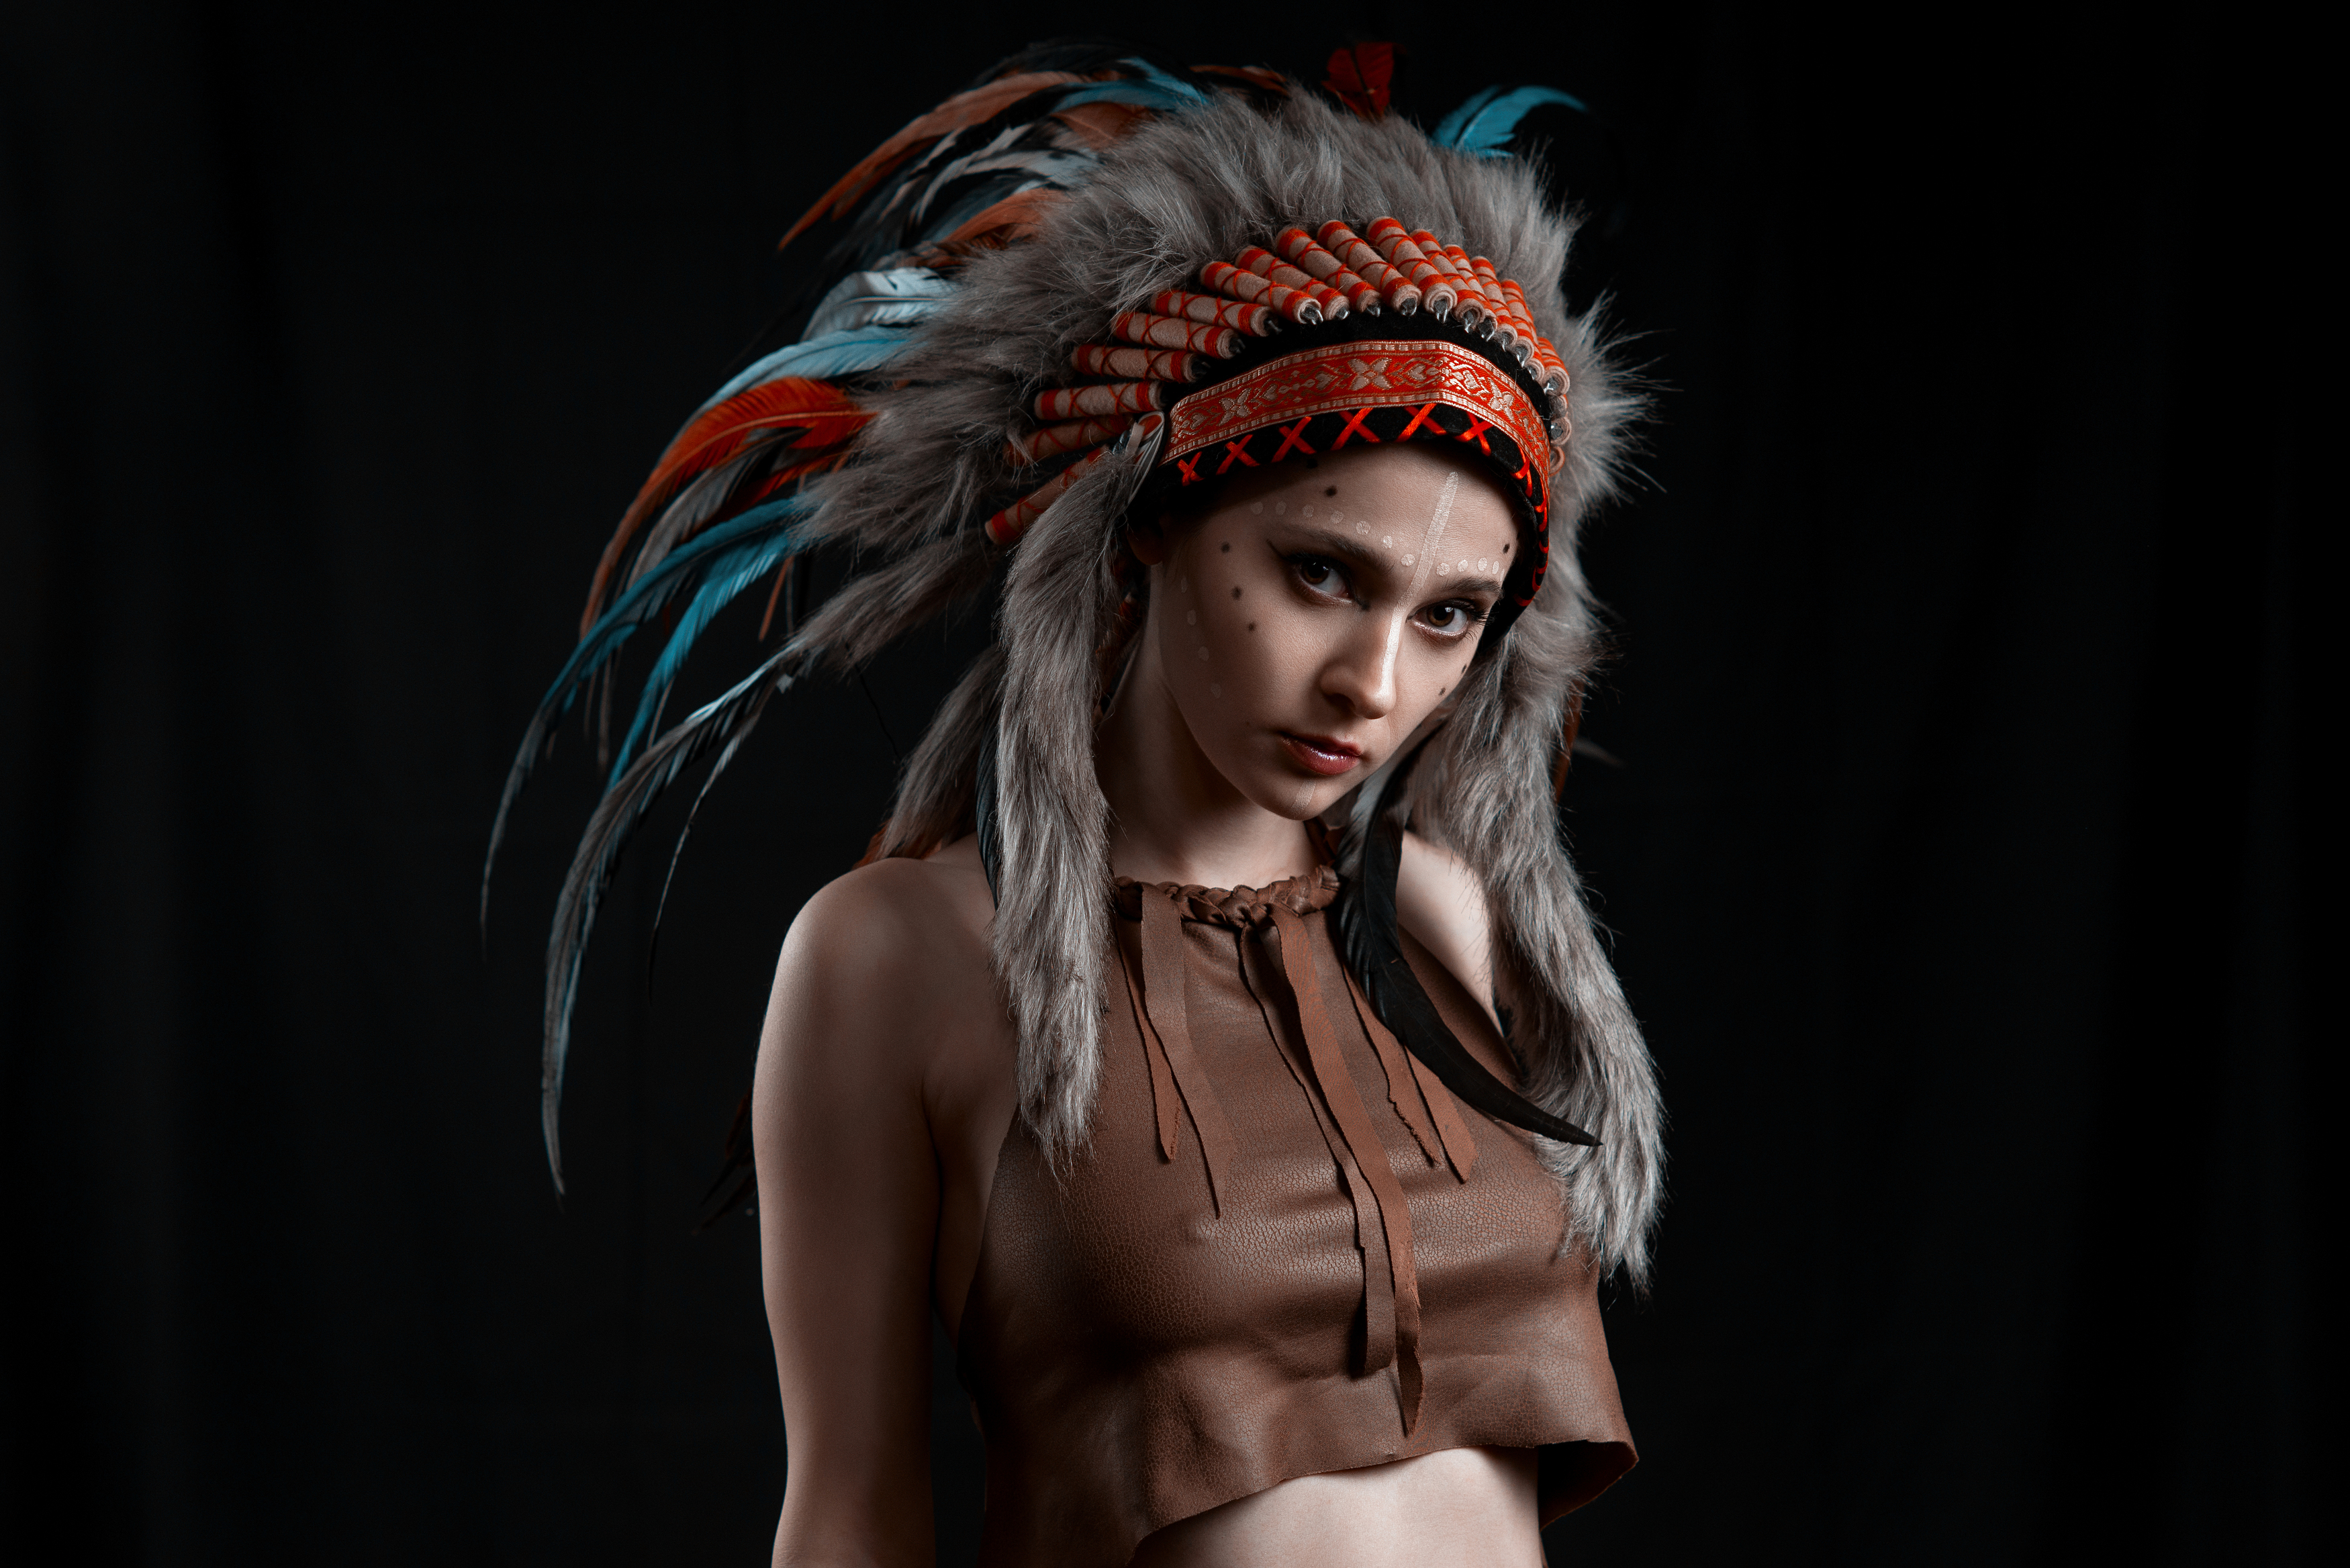 People 3500x2336 Leeloush Keer women Native American clothing makeup brown clothing nipple bulge feathers black background portrait face paint low light simple background